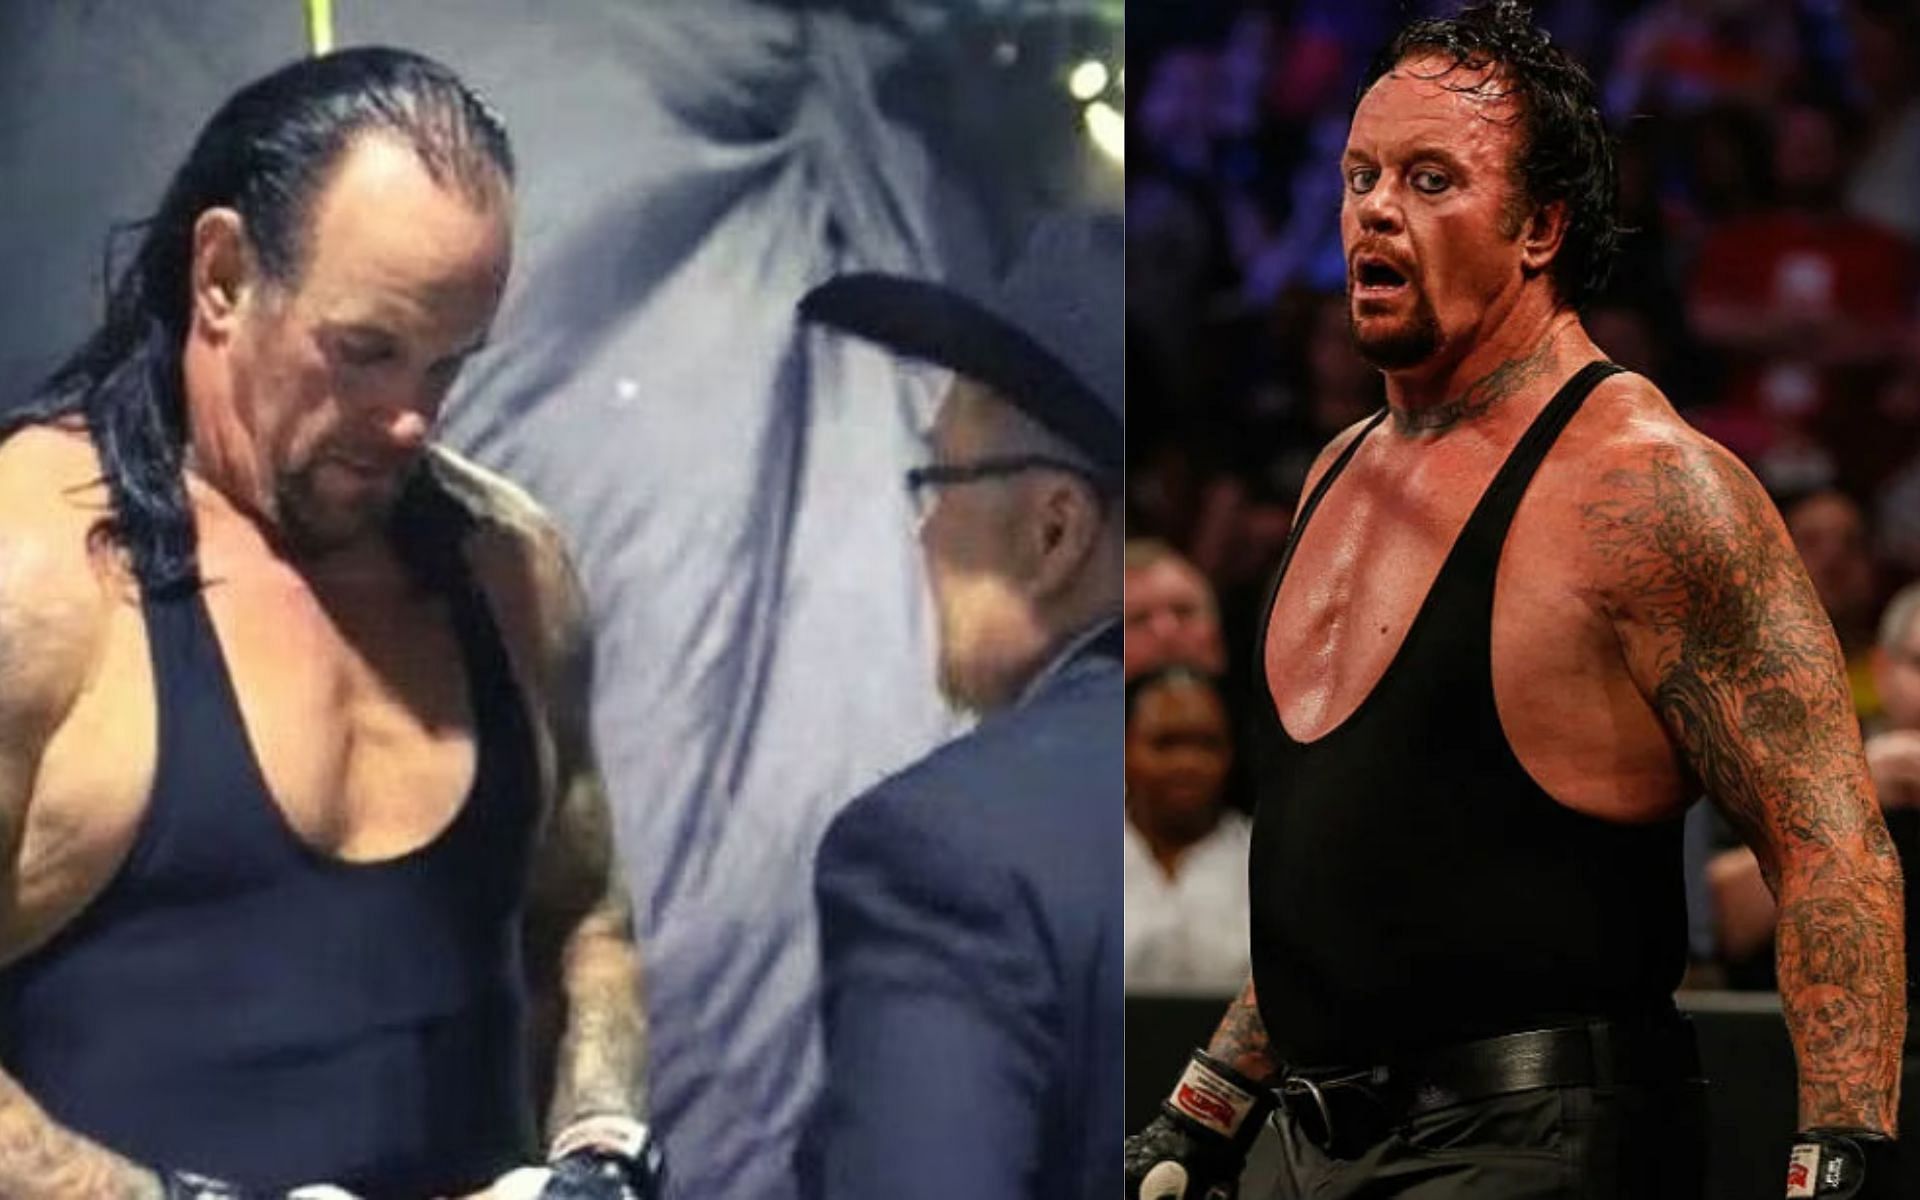 The Undertaker has gone down in wrestling history as one of the most iconic characters